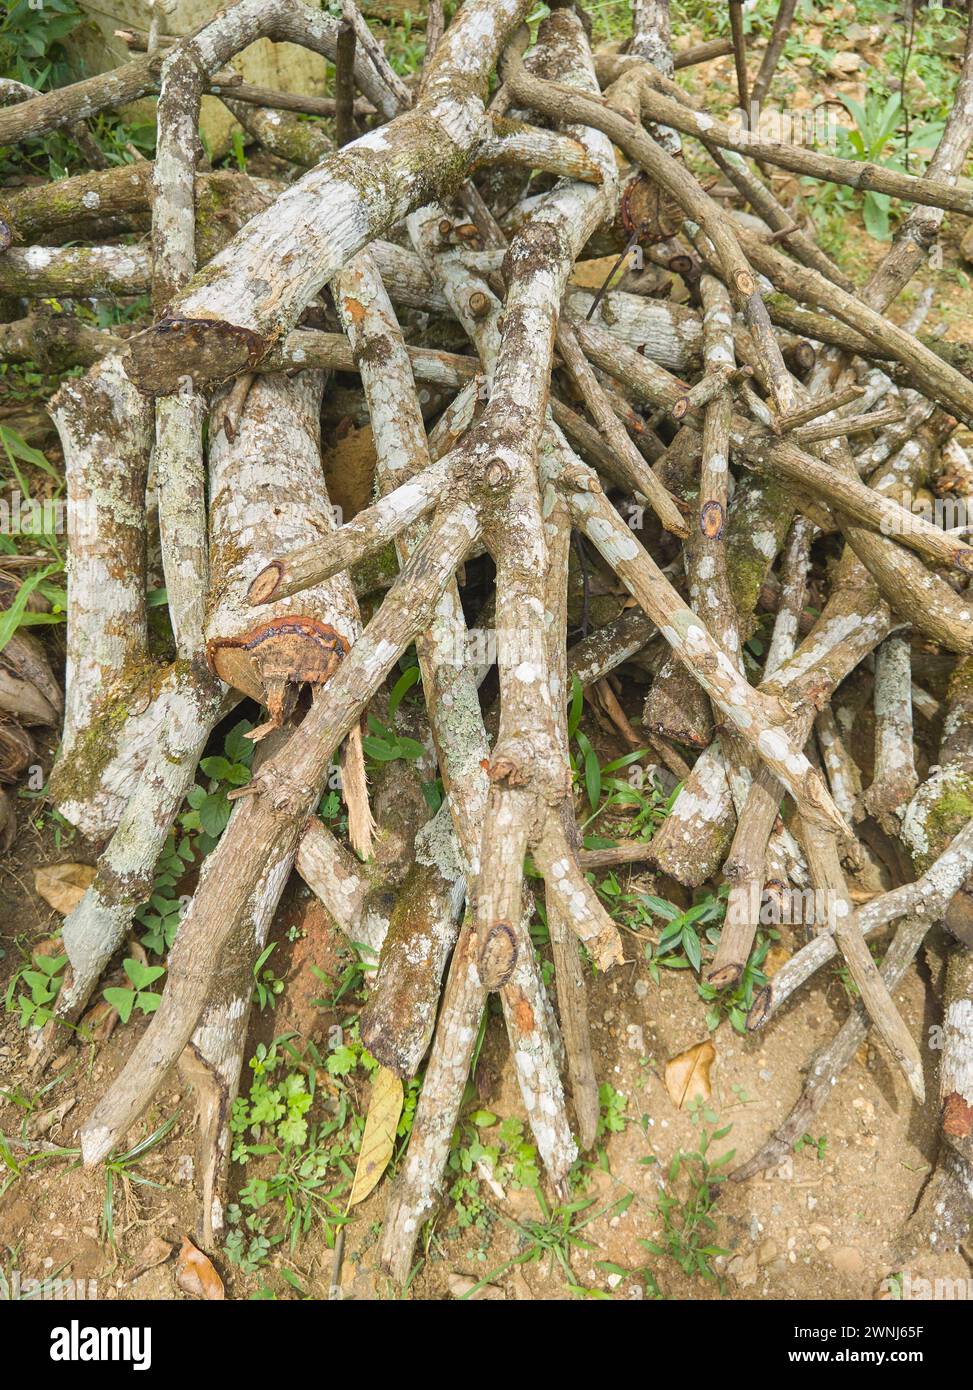 pile of chopped mango tree firewood, preparation for winter, fireplace or stove, cut tree logs at lumber mill for alternative fuel natural wood in the Stock Photo